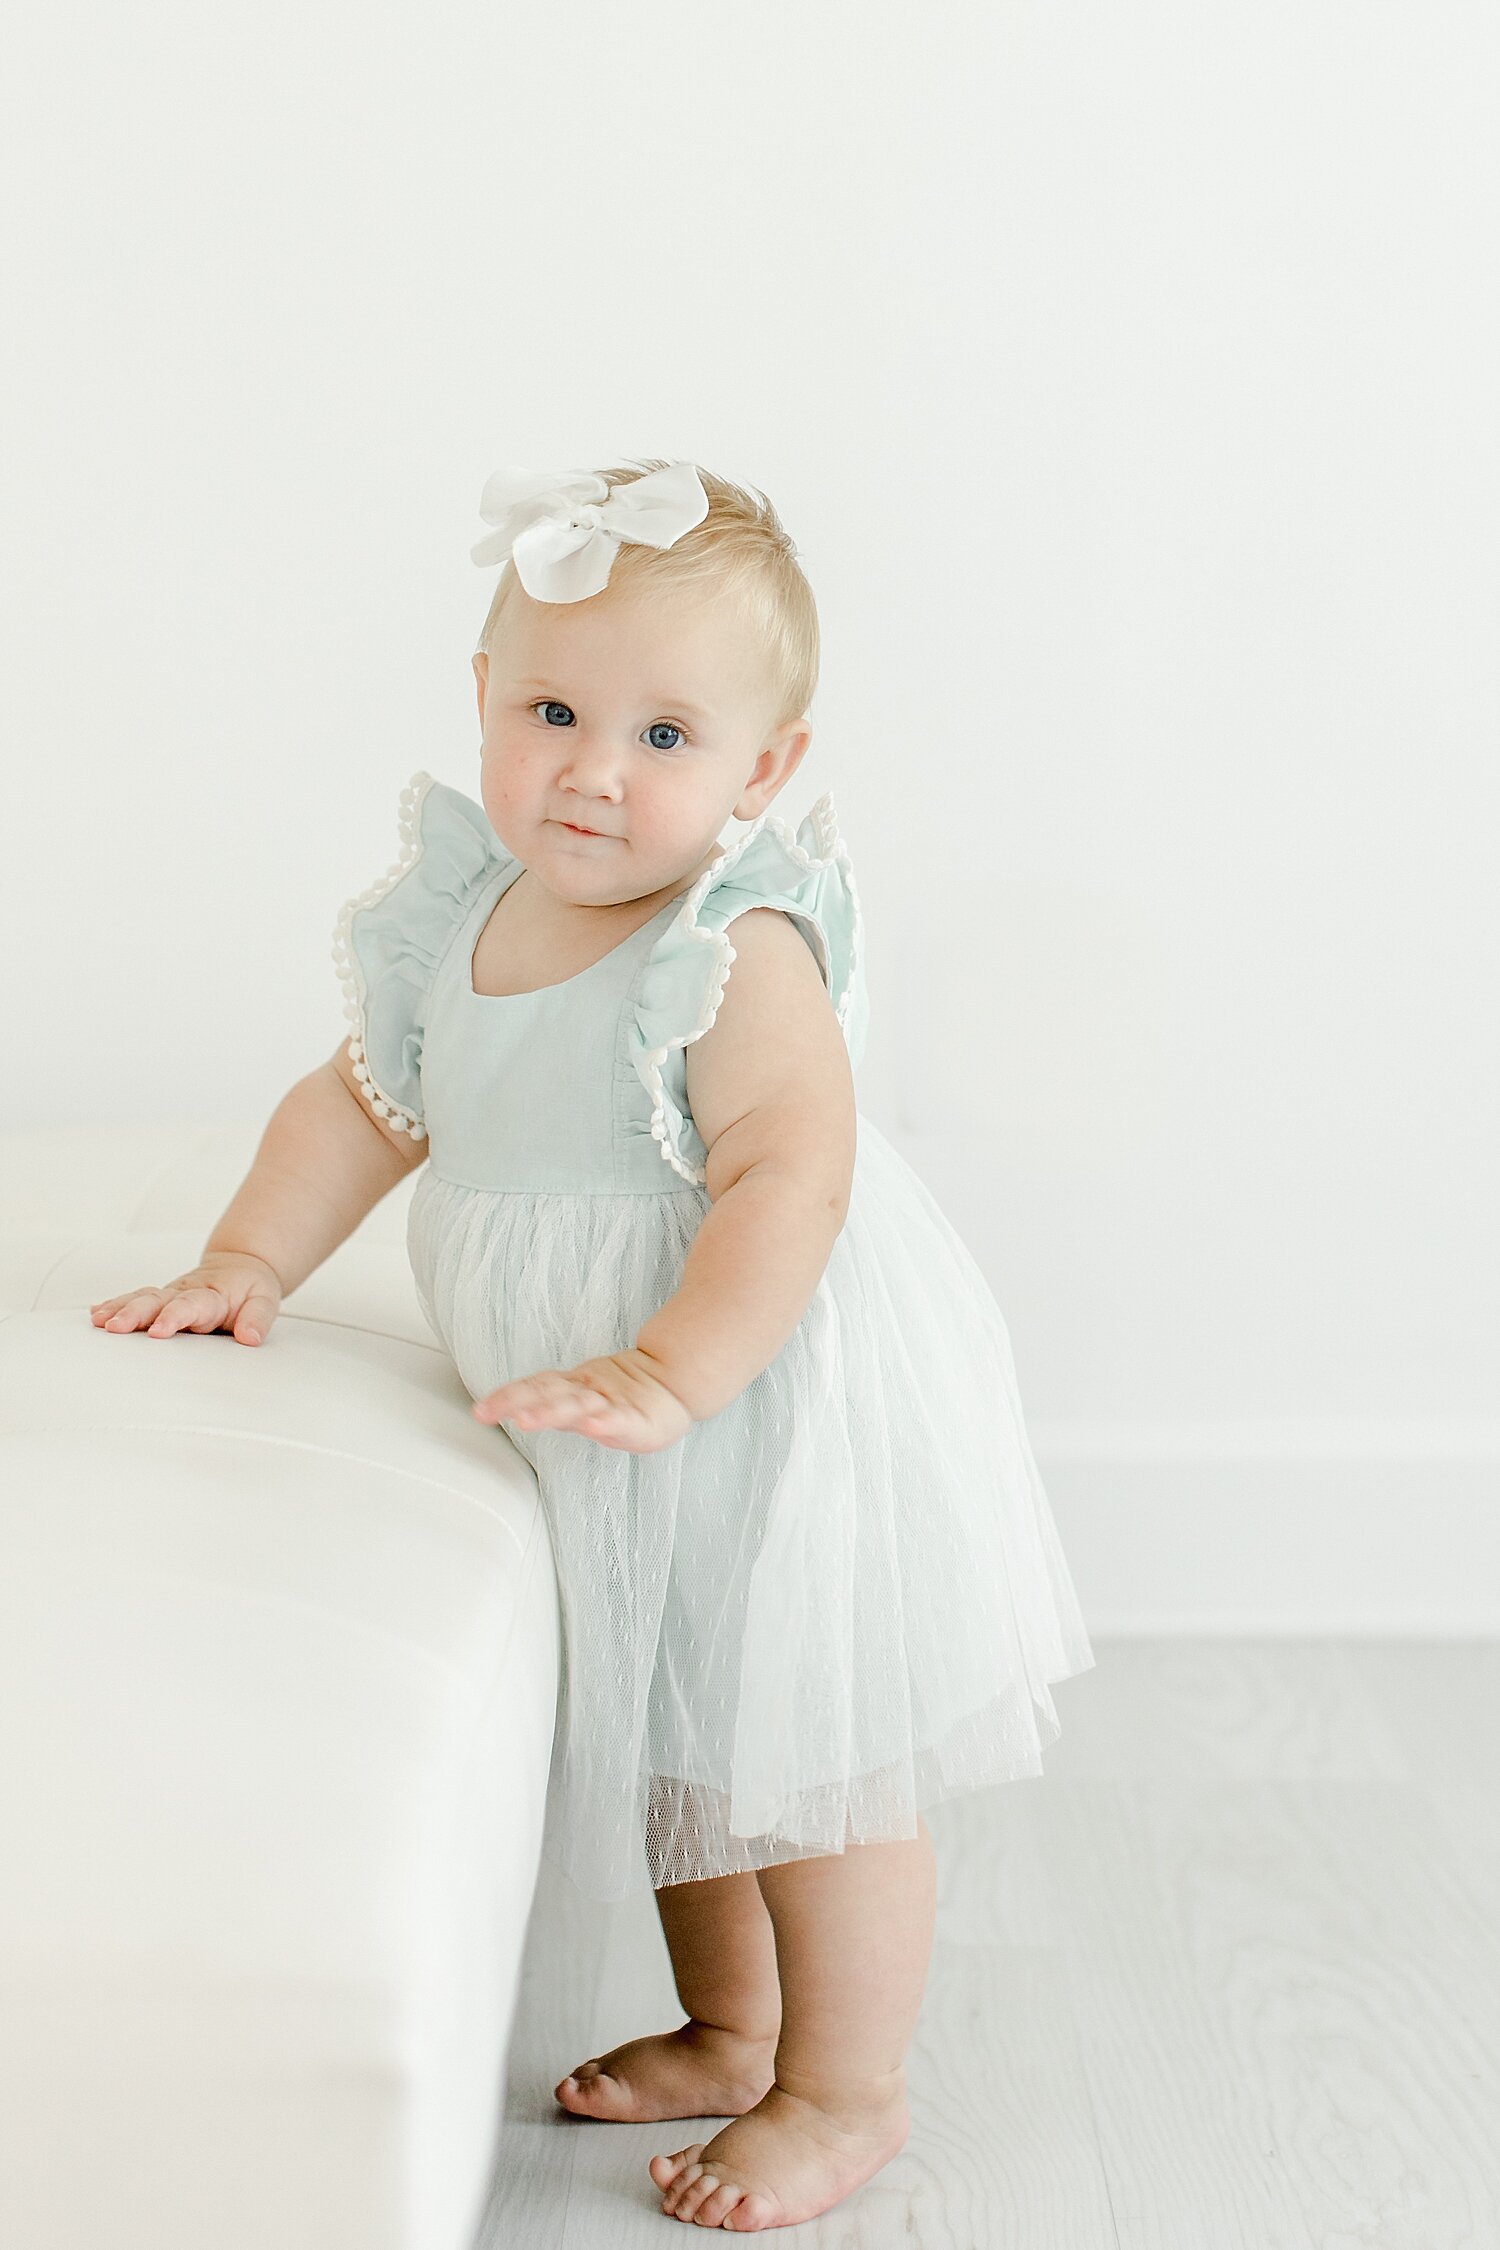 8 month old baby girl standing by couch in studio for photos with Kristin Wood Photography.